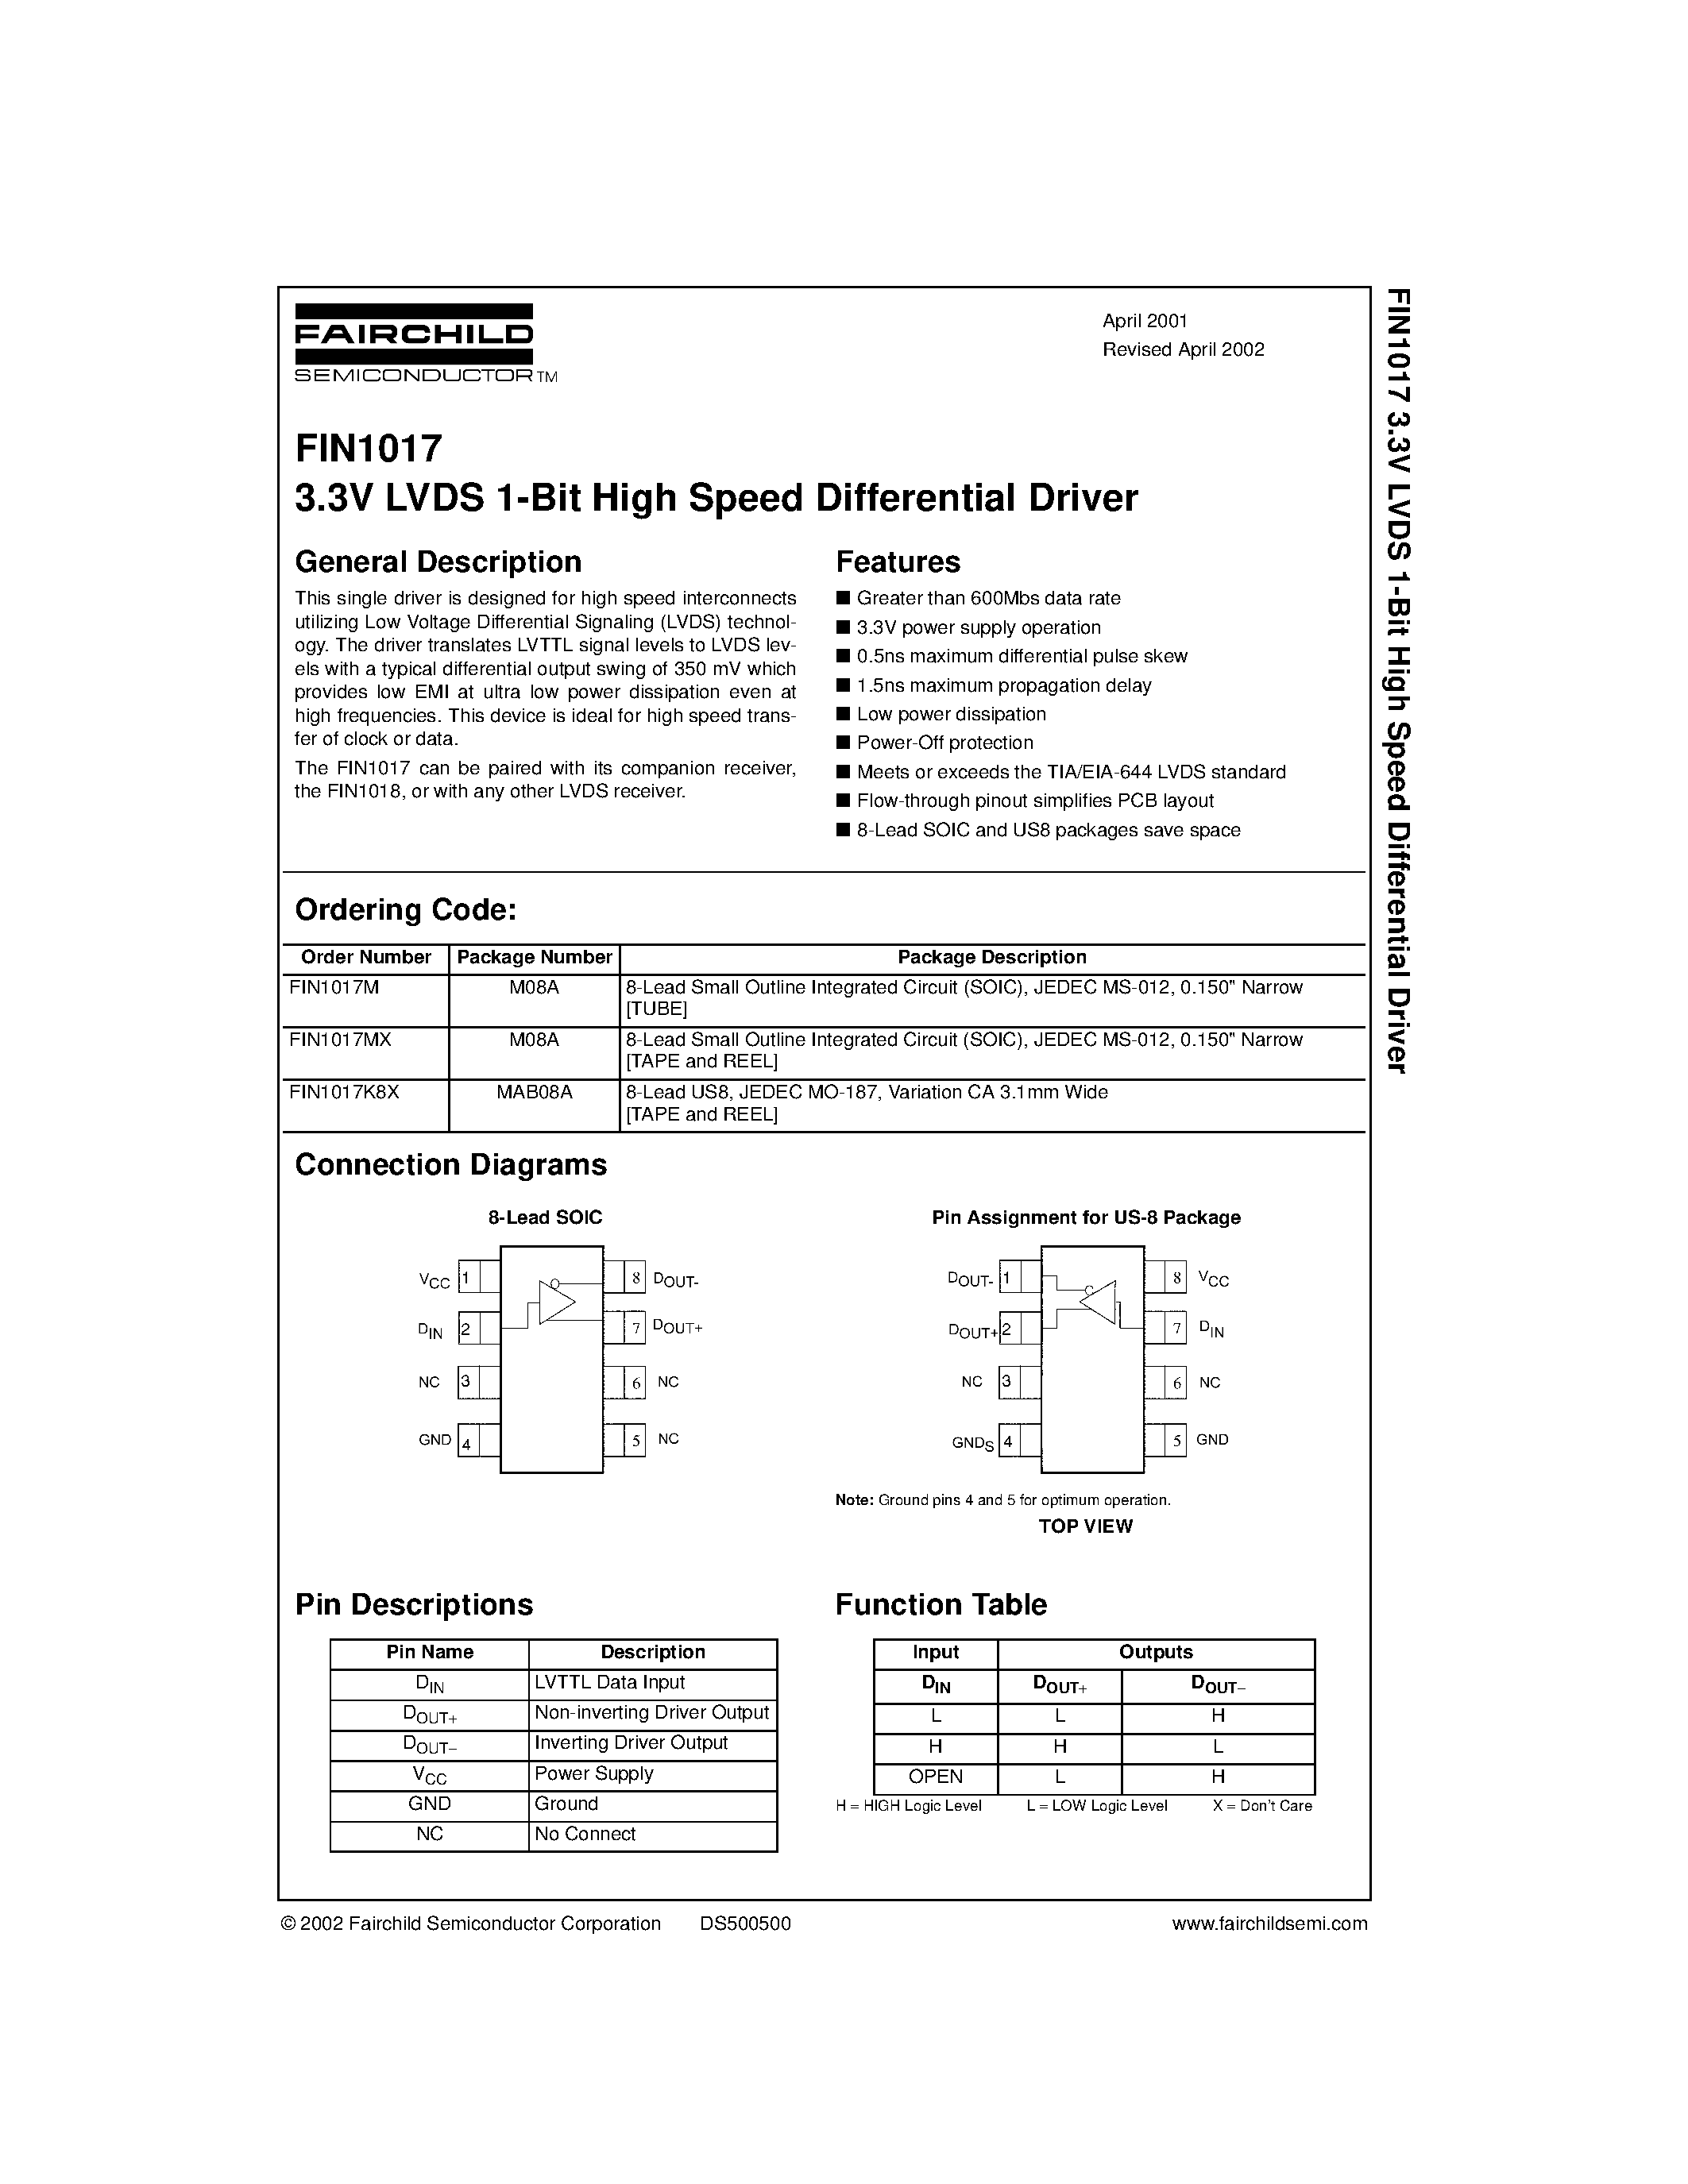 Datasheet FIN1017K8X - 3.3V LVDS 1-Bit High Speed Differential Driver page 1